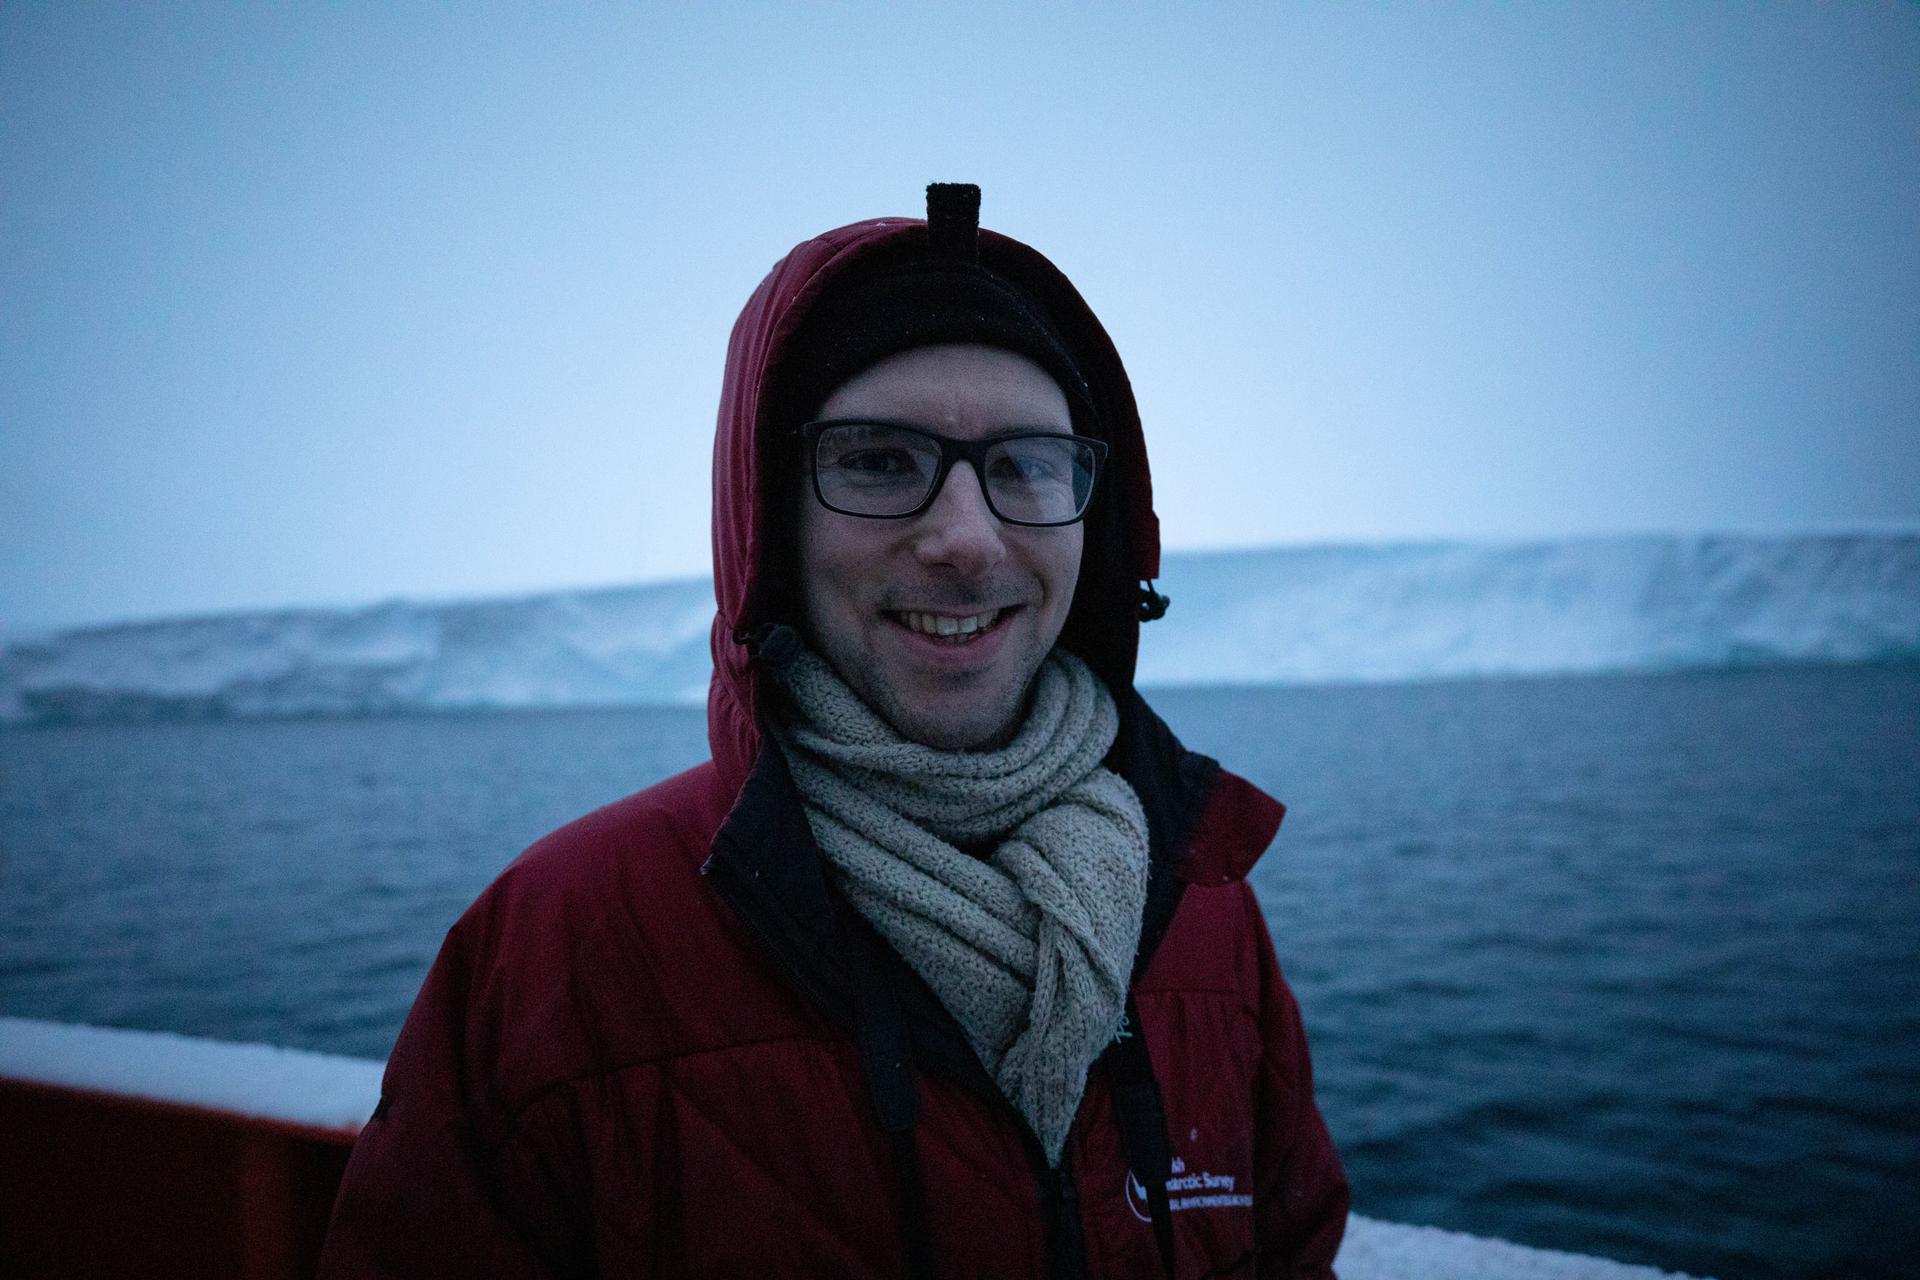 Oceanographer Peter Sheehan is shown with a red jacket and white scarf with Thwaites glacier in the background.